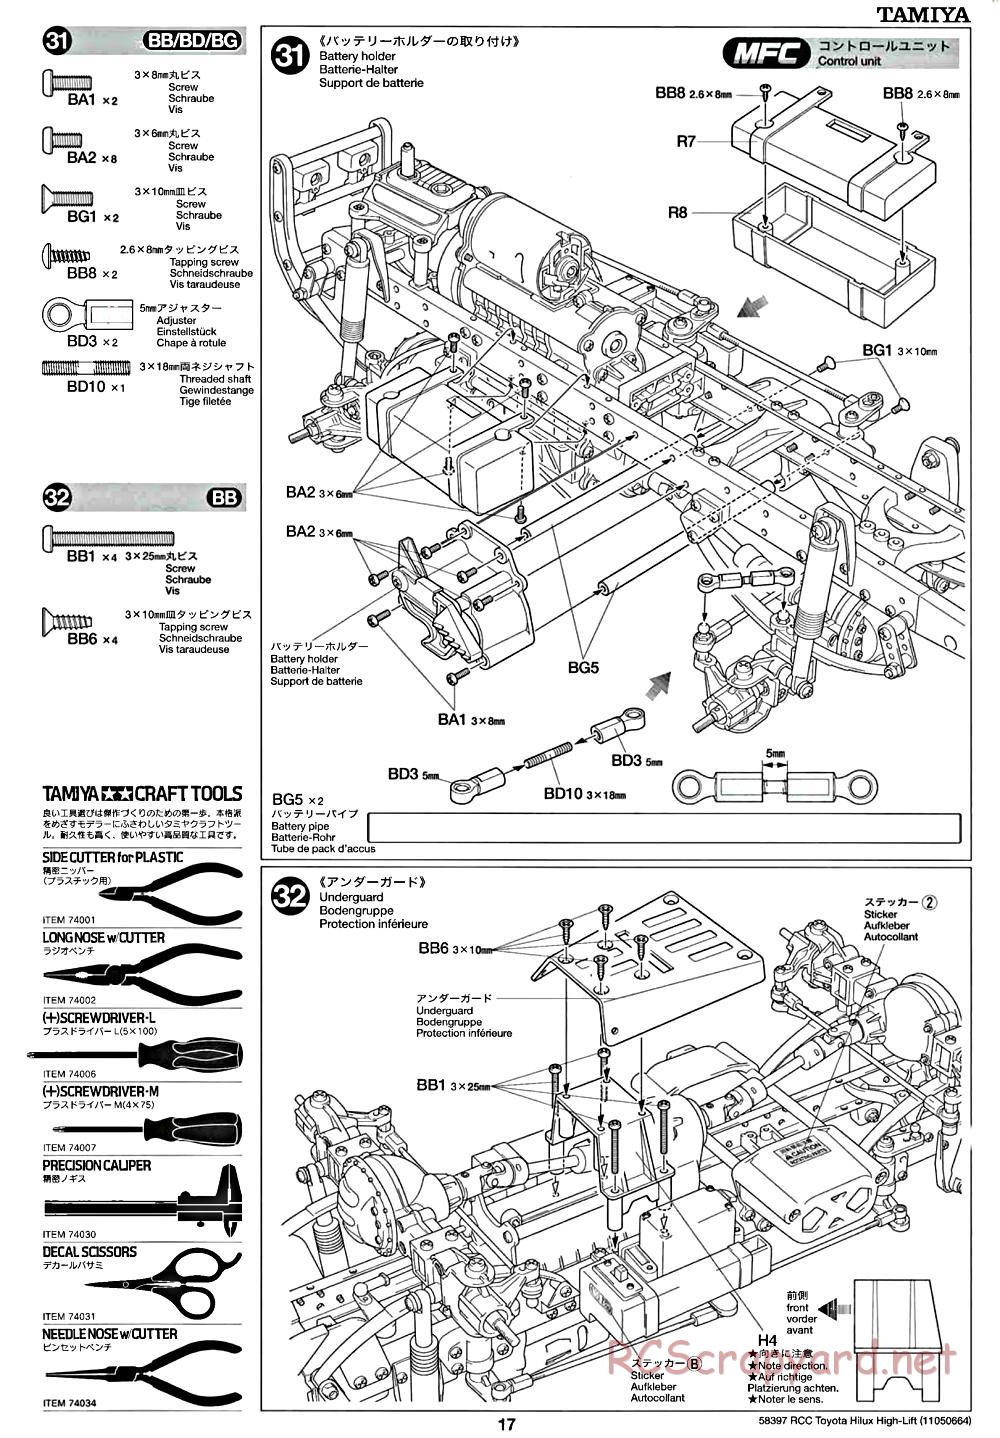 Tamiya - Toyota Hilux High-Lift Chassis - Manual - Page 17